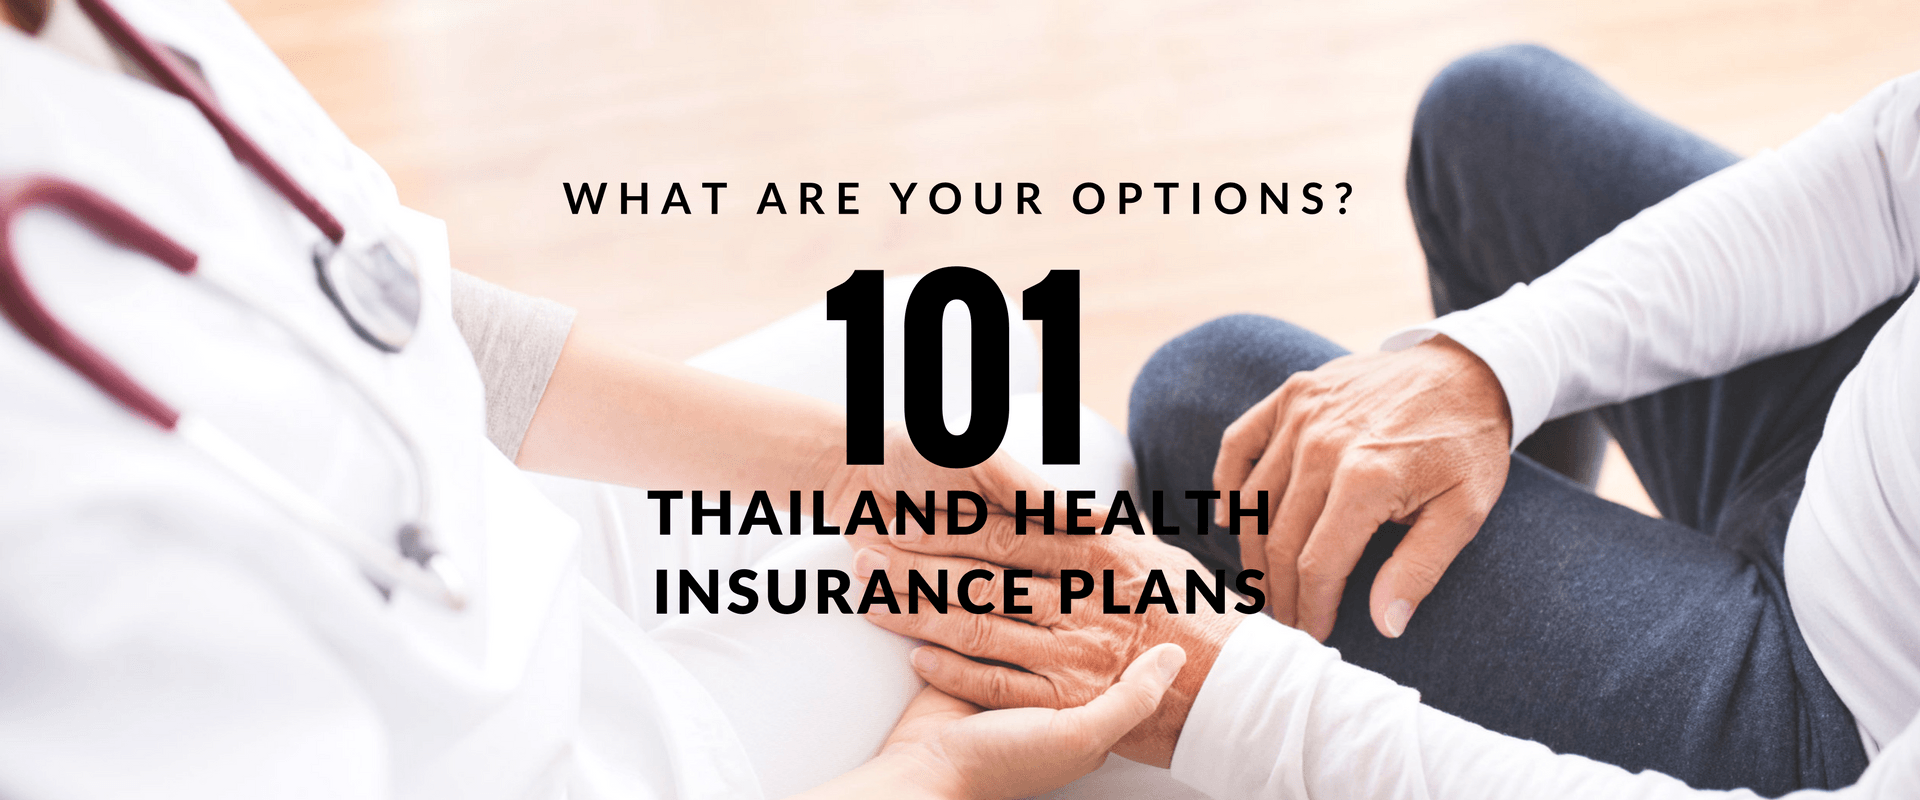 , Thailand health insurance plans 101: What are your options?